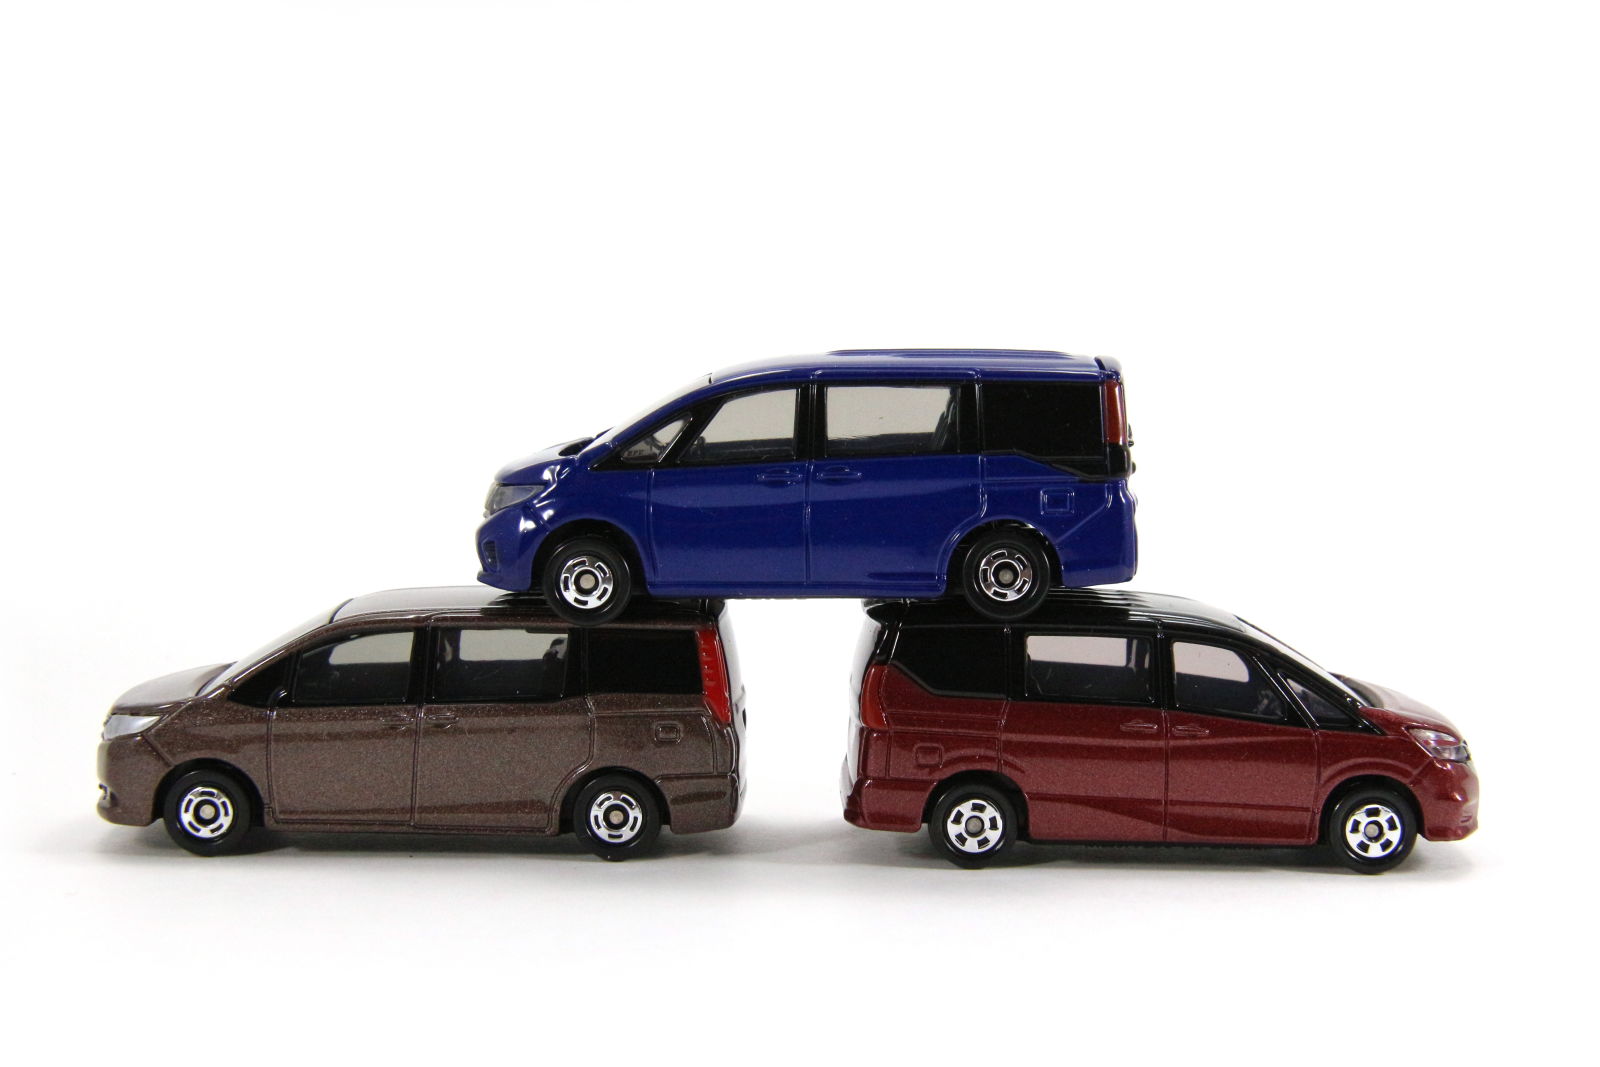 Illustration for article titled Land of the Rising Sunday: Minivans of Japan